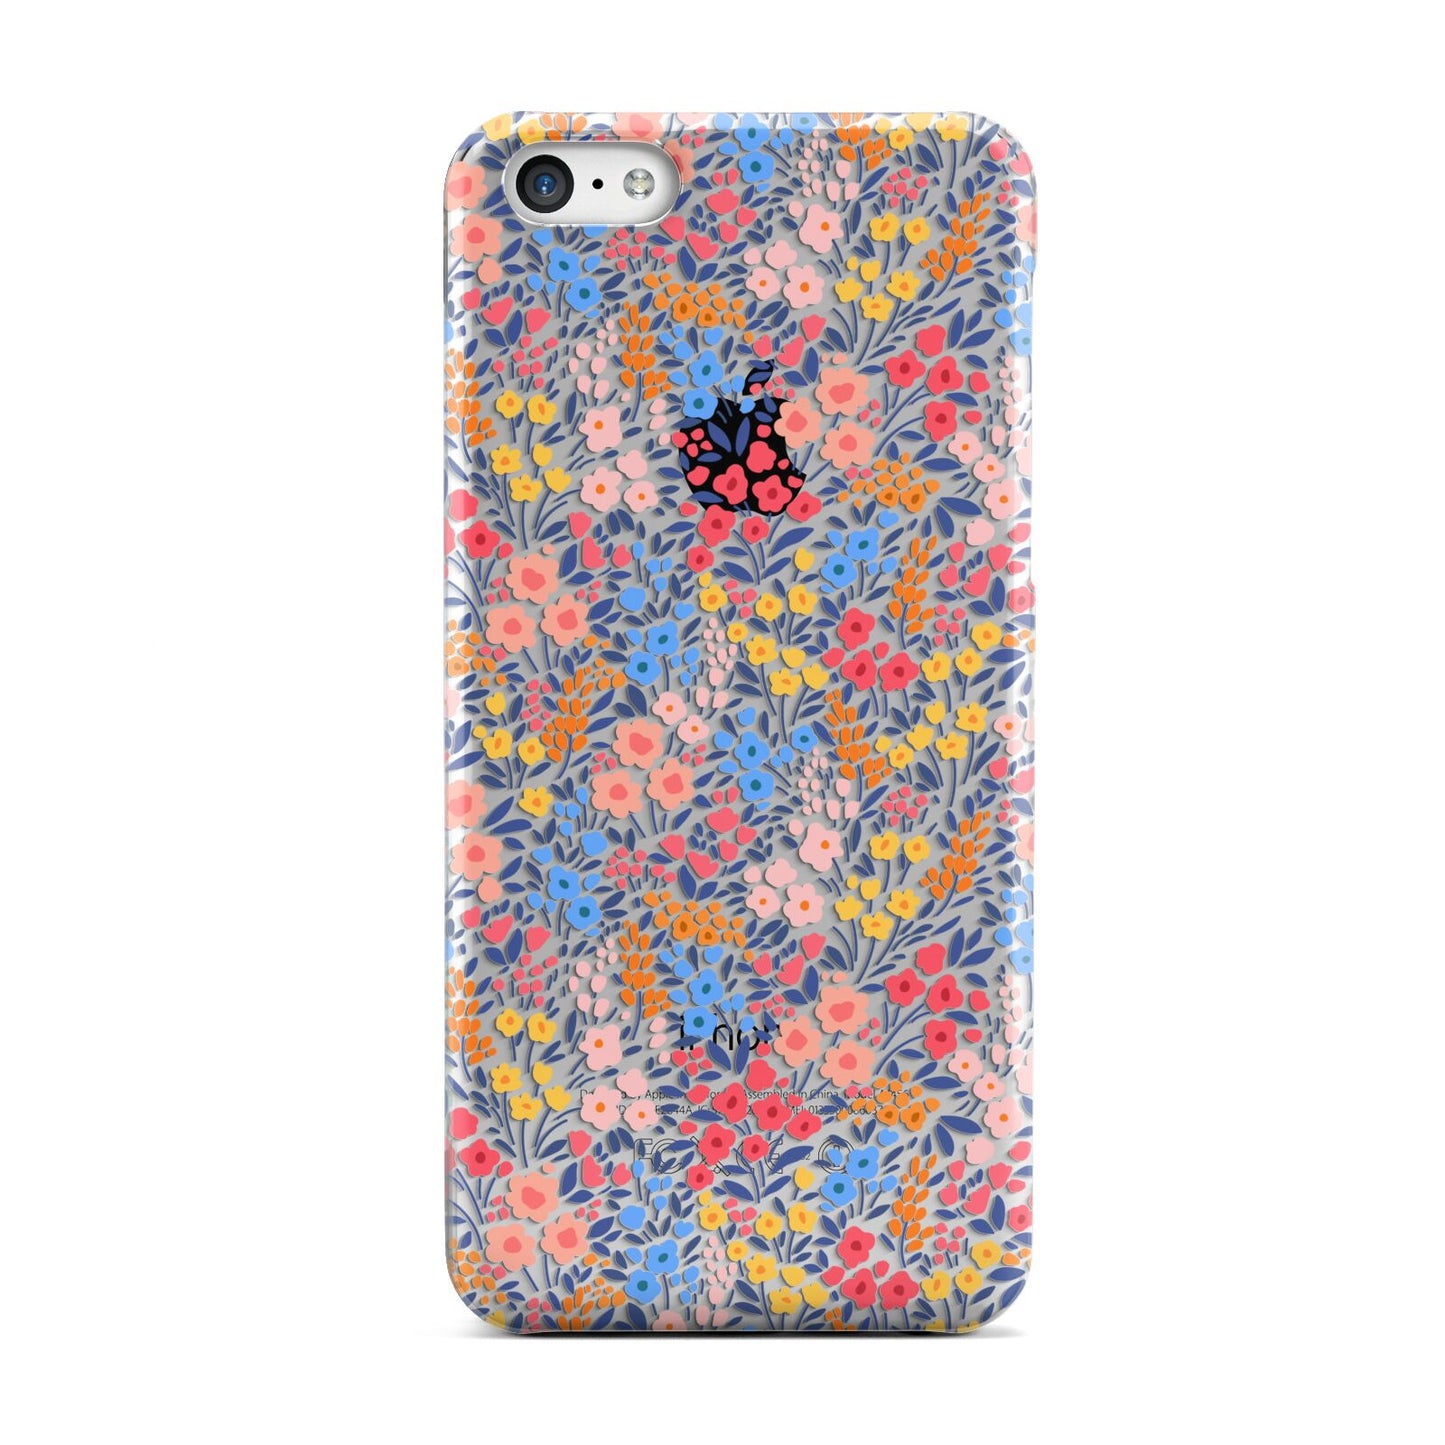 Small Flowers Apple iPhone 5c Case